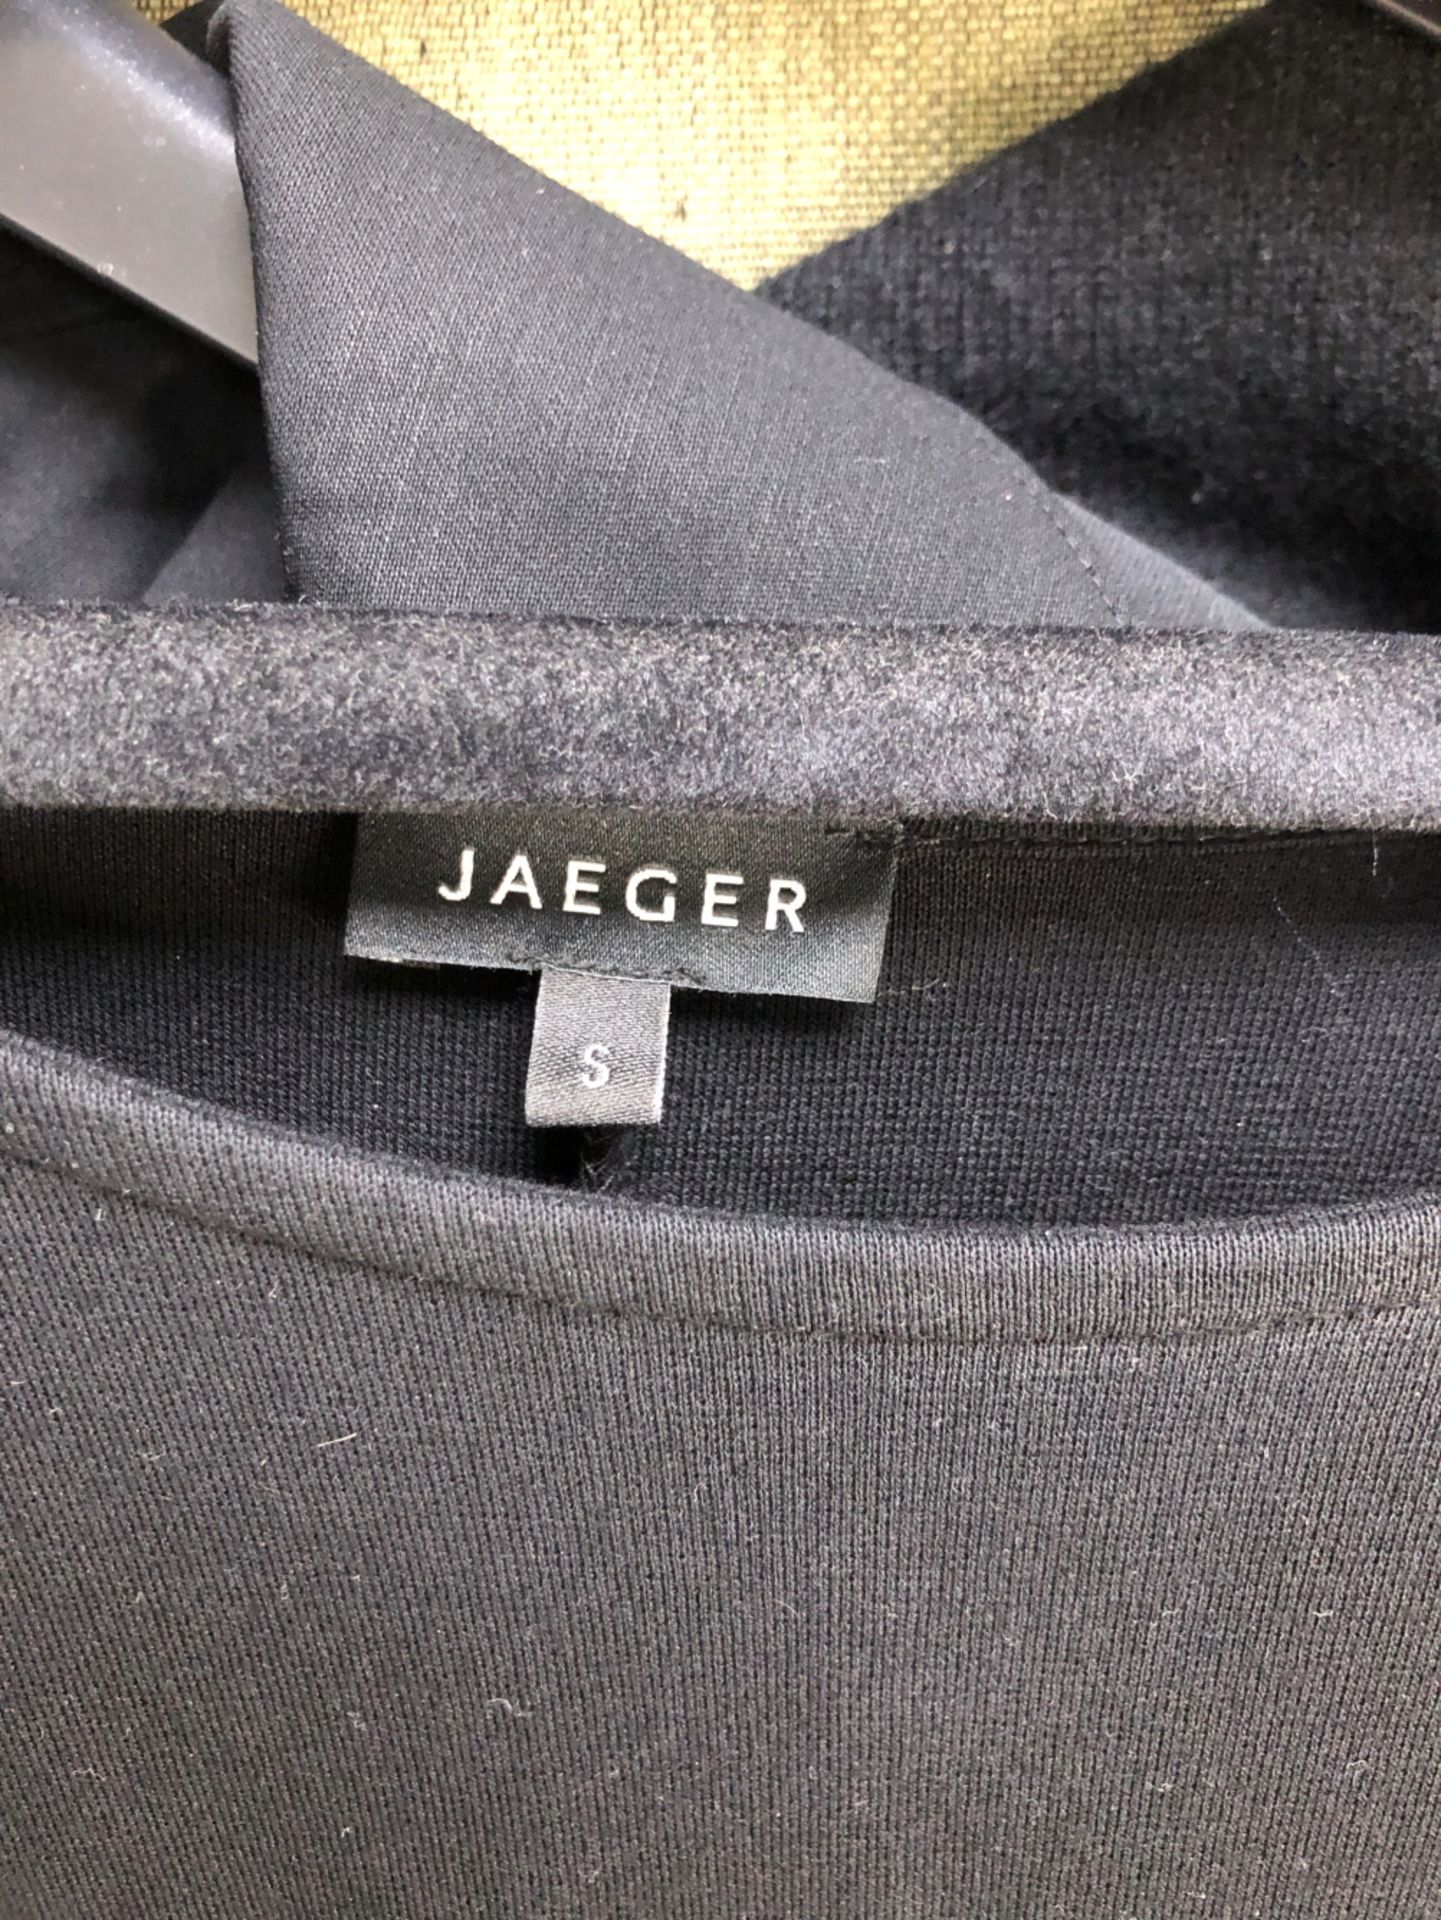 A JAEGER BLACK SHIFT DRESS SIZE SMALL, A TAIFUN COLLECTION JACKET SIZE GB 20, A GIANFRANCO FERRE - Image 5 of 12